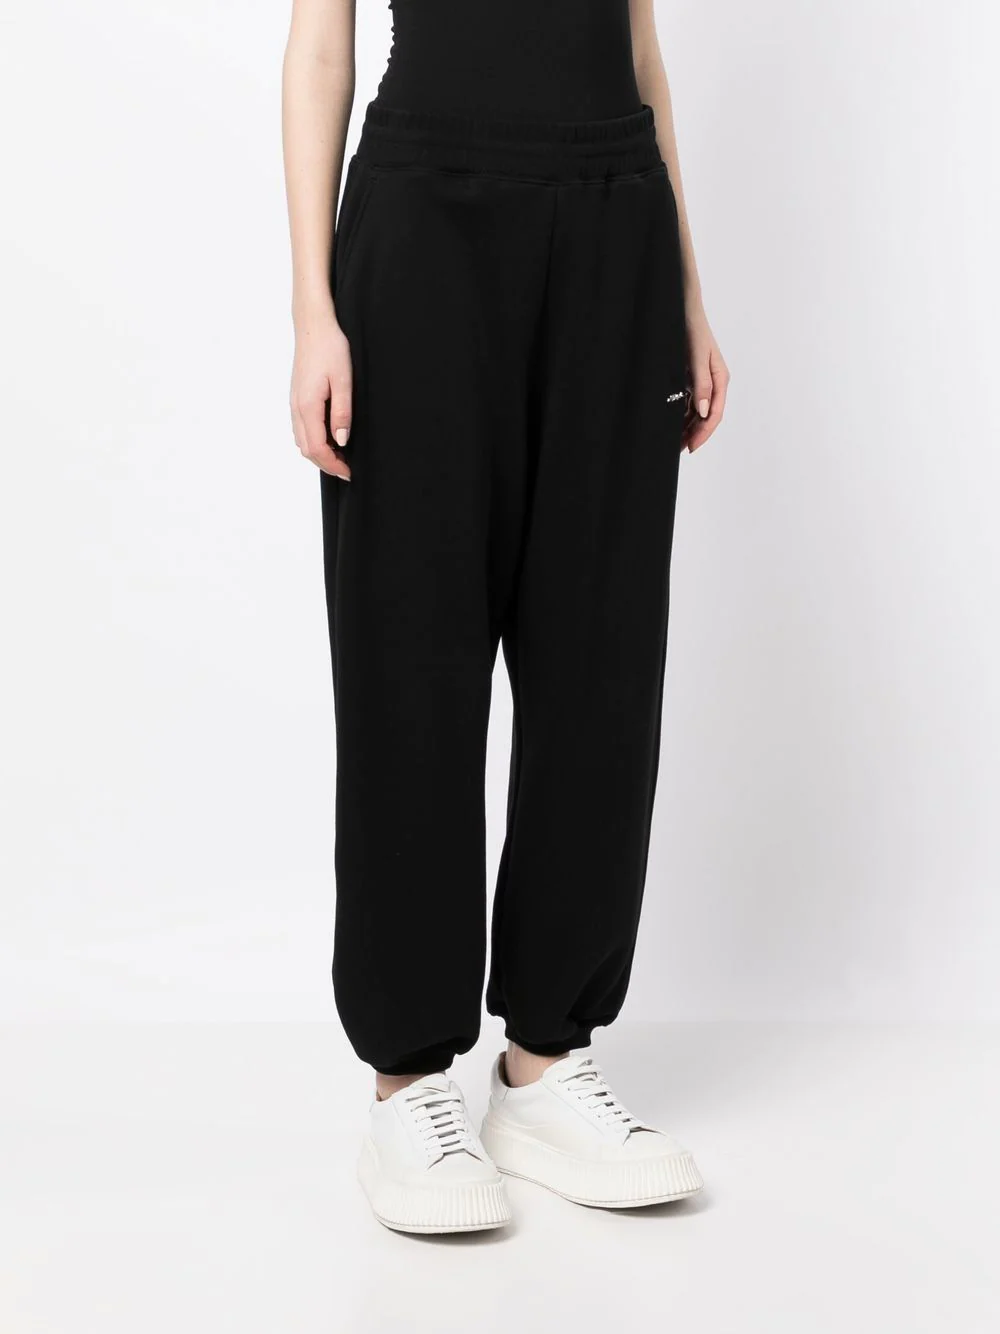 3.1-PhillipLim-Compact-French-Terry-Sweatpants-Black-3